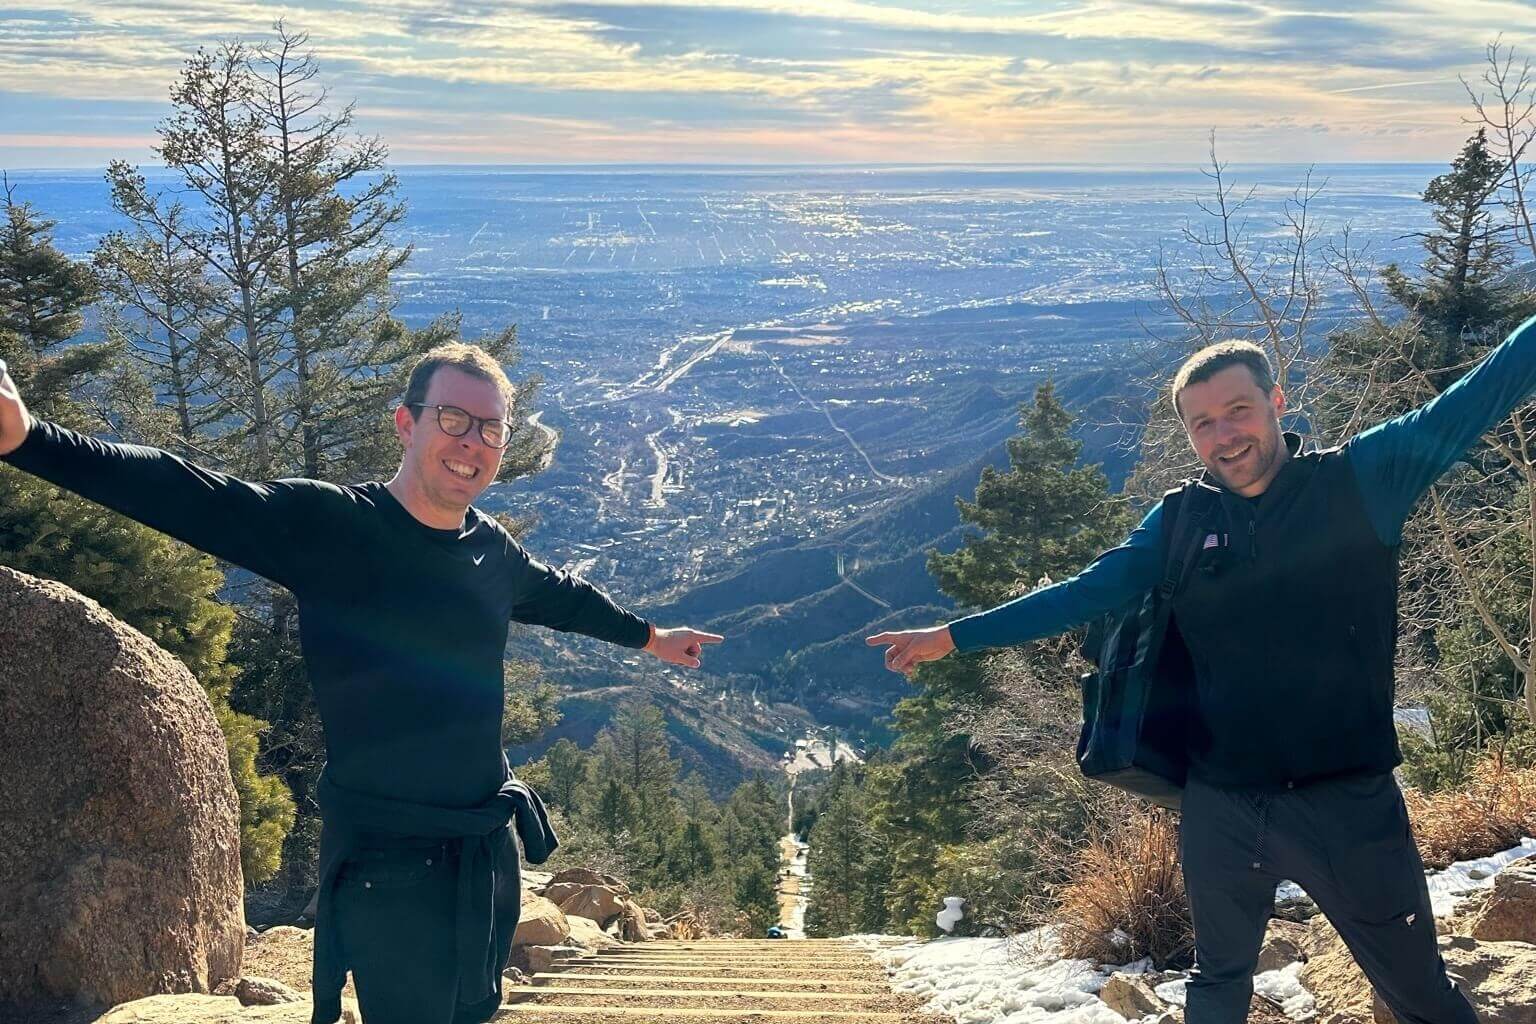 A rundown of our eventful week visiting clients in Colorado Springs